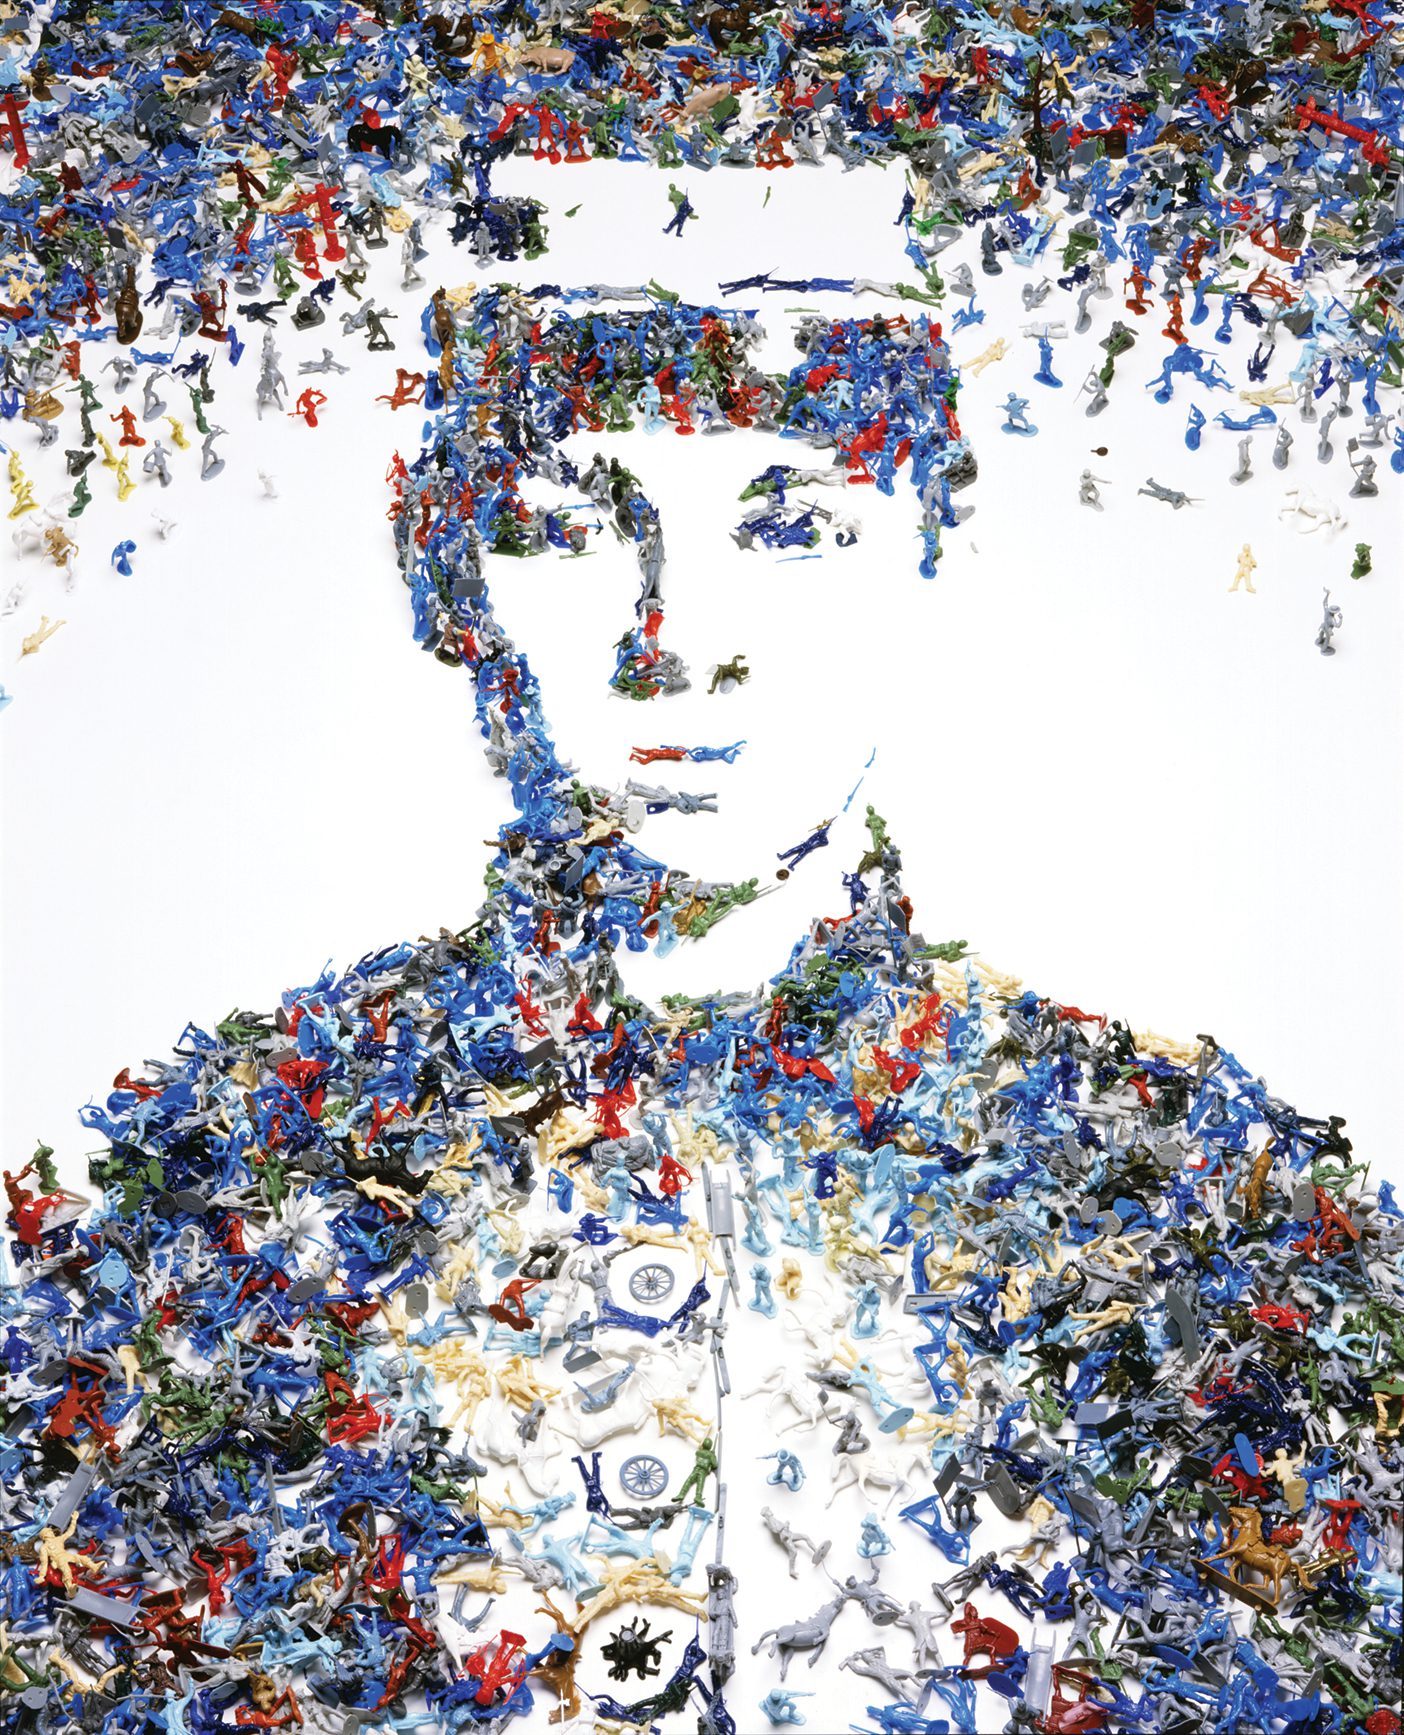 An art piece that shows a portrait of a soldier made out of toy soldiers